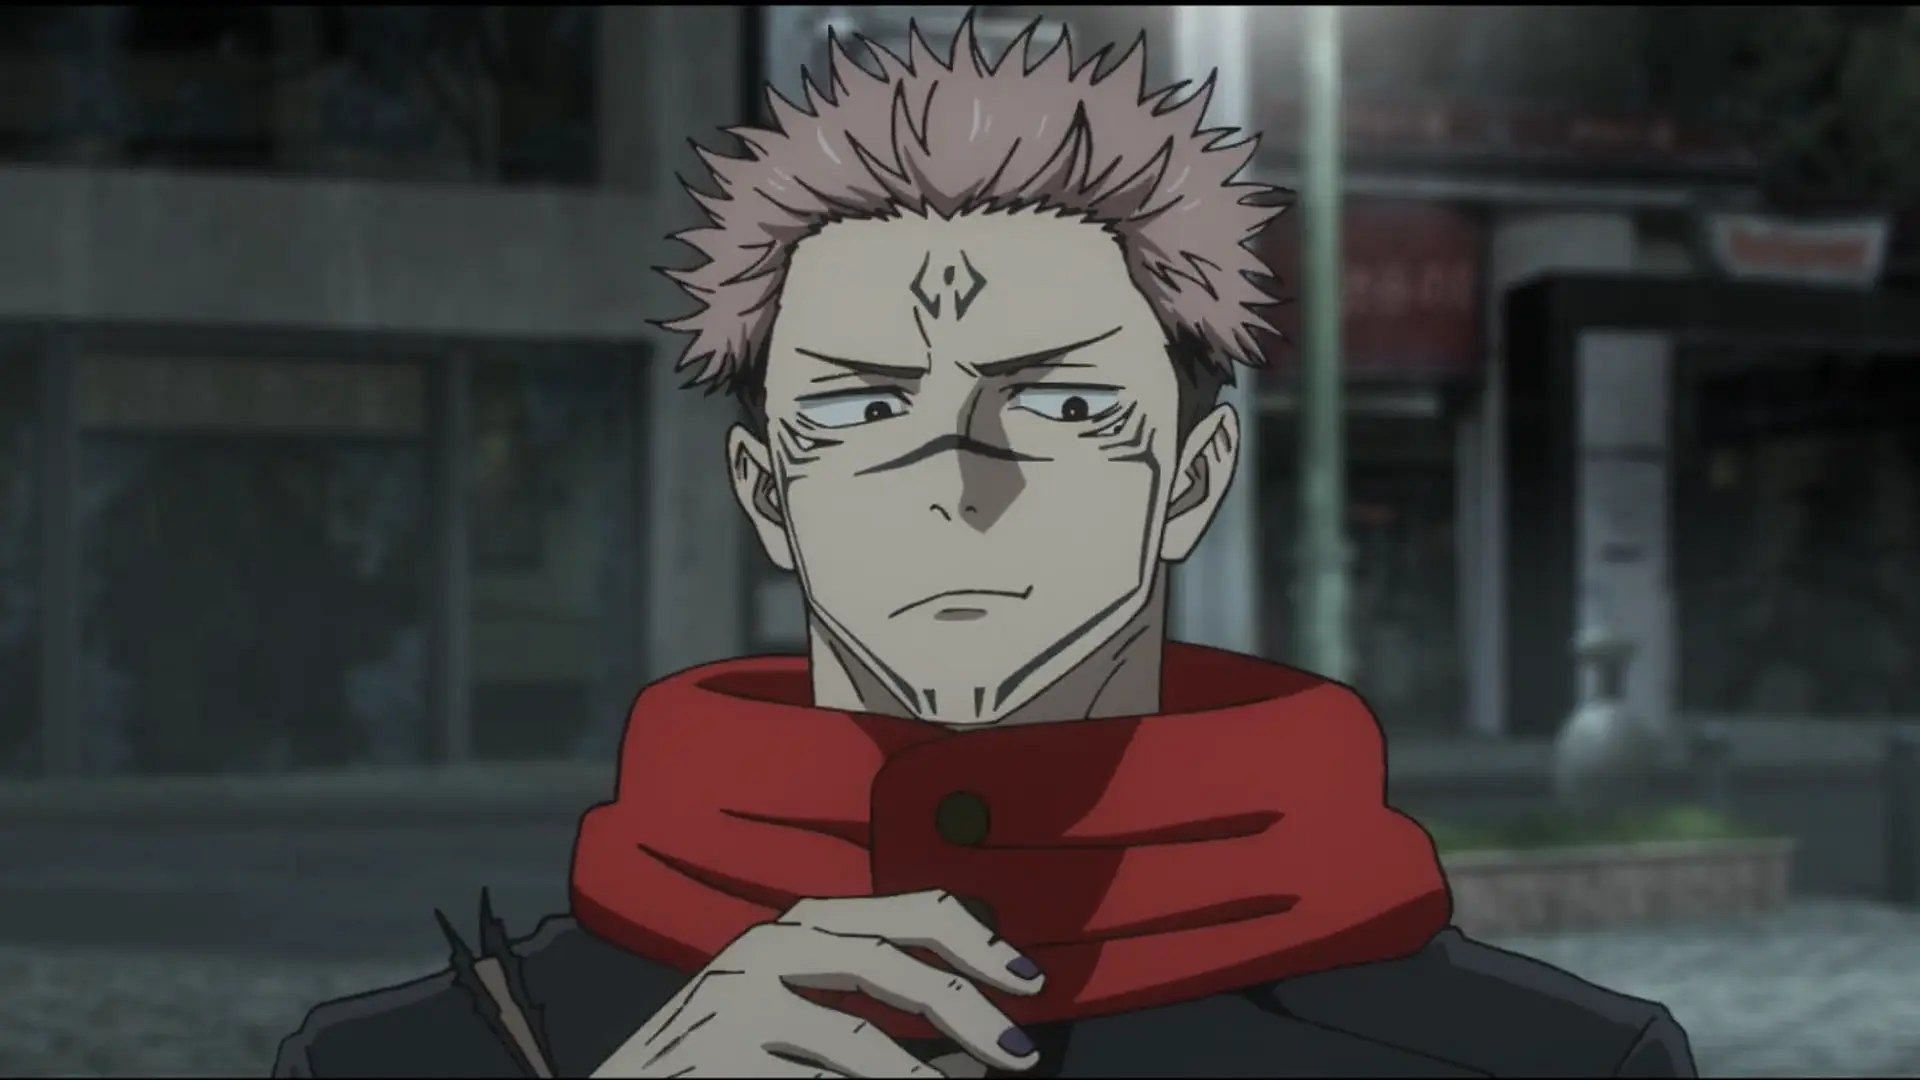 Jujutsu Kaisen chapter 251: Release date and time, what to expect, and more (Image via MAPPA Studios)